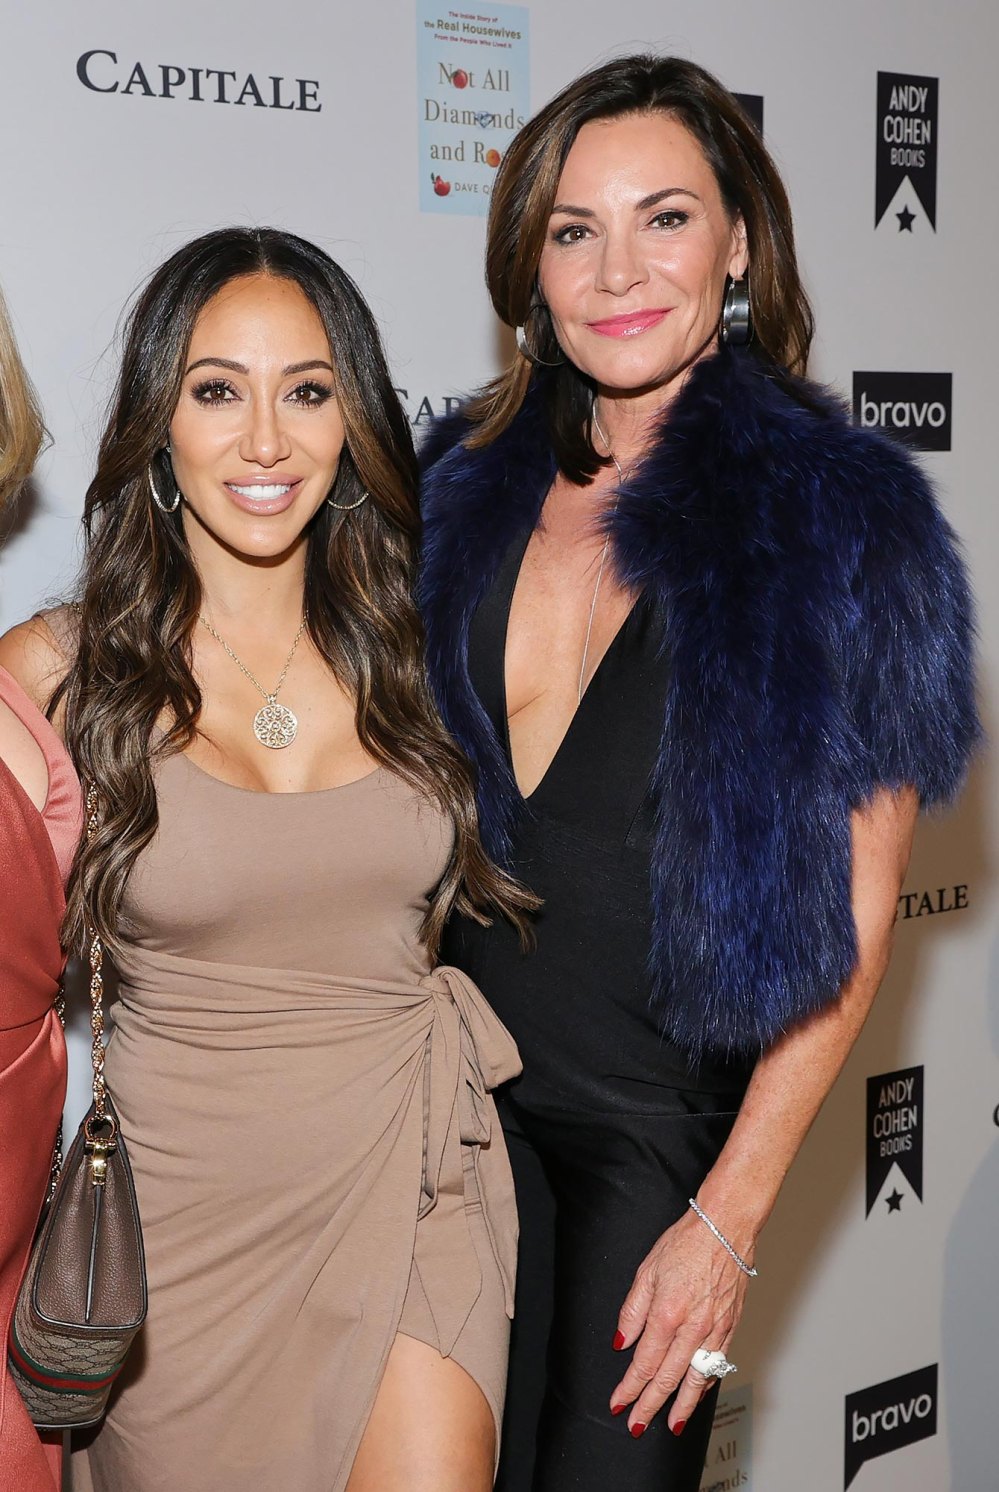 Melissa Gorga and Luann De Lesseps Share Their Support for Andy Cohen After Leah McSweeney Lawsuit